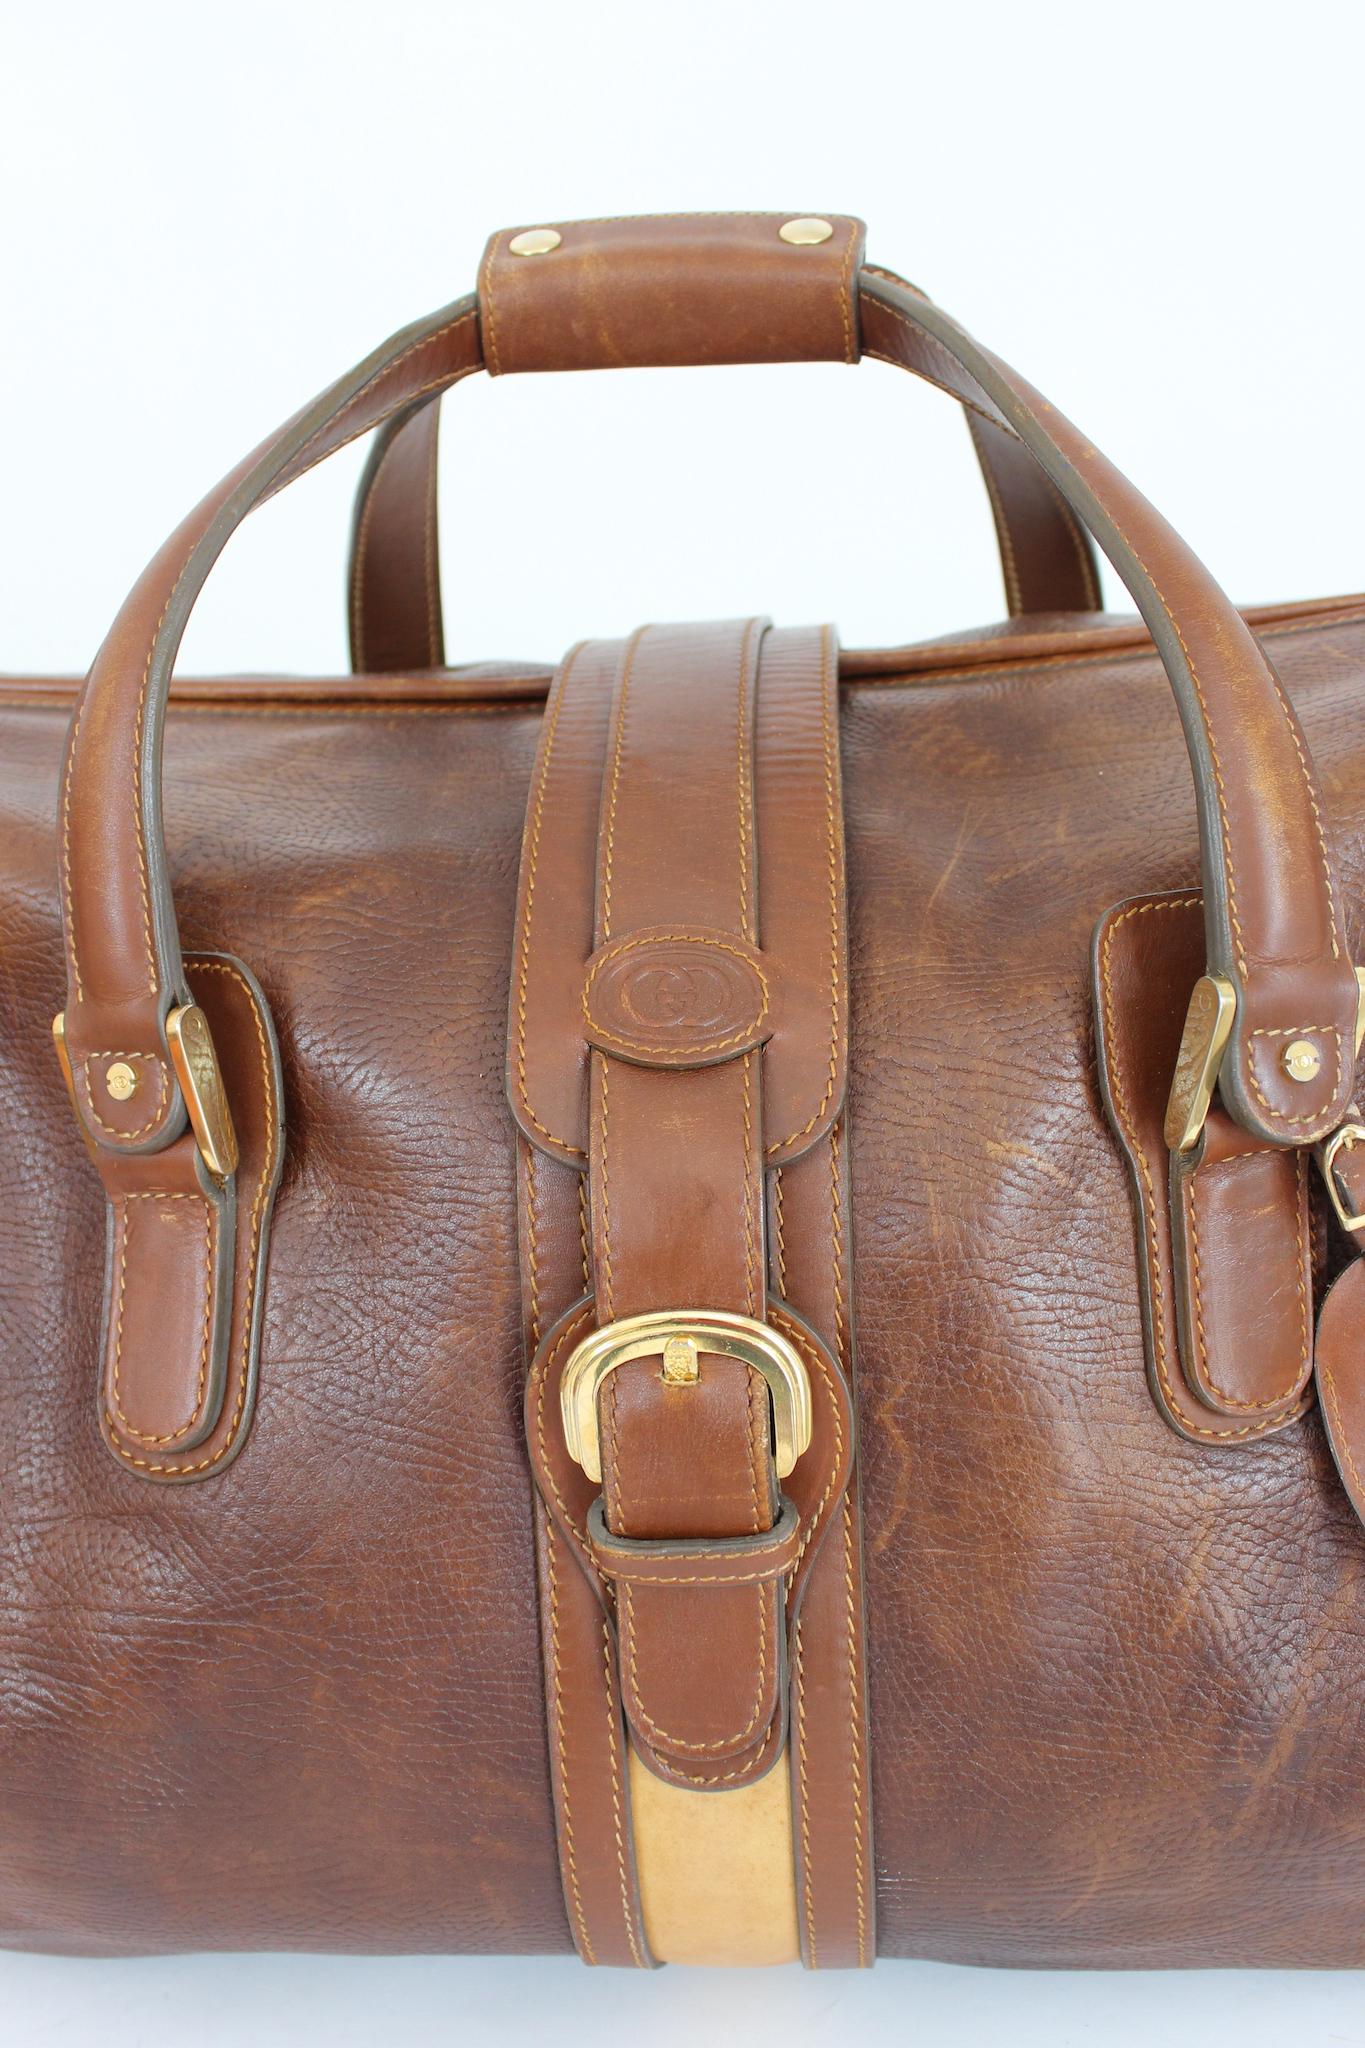 Women's or Men's Gucci Leather Brown Large Duffle Bag Vintage Carry-on